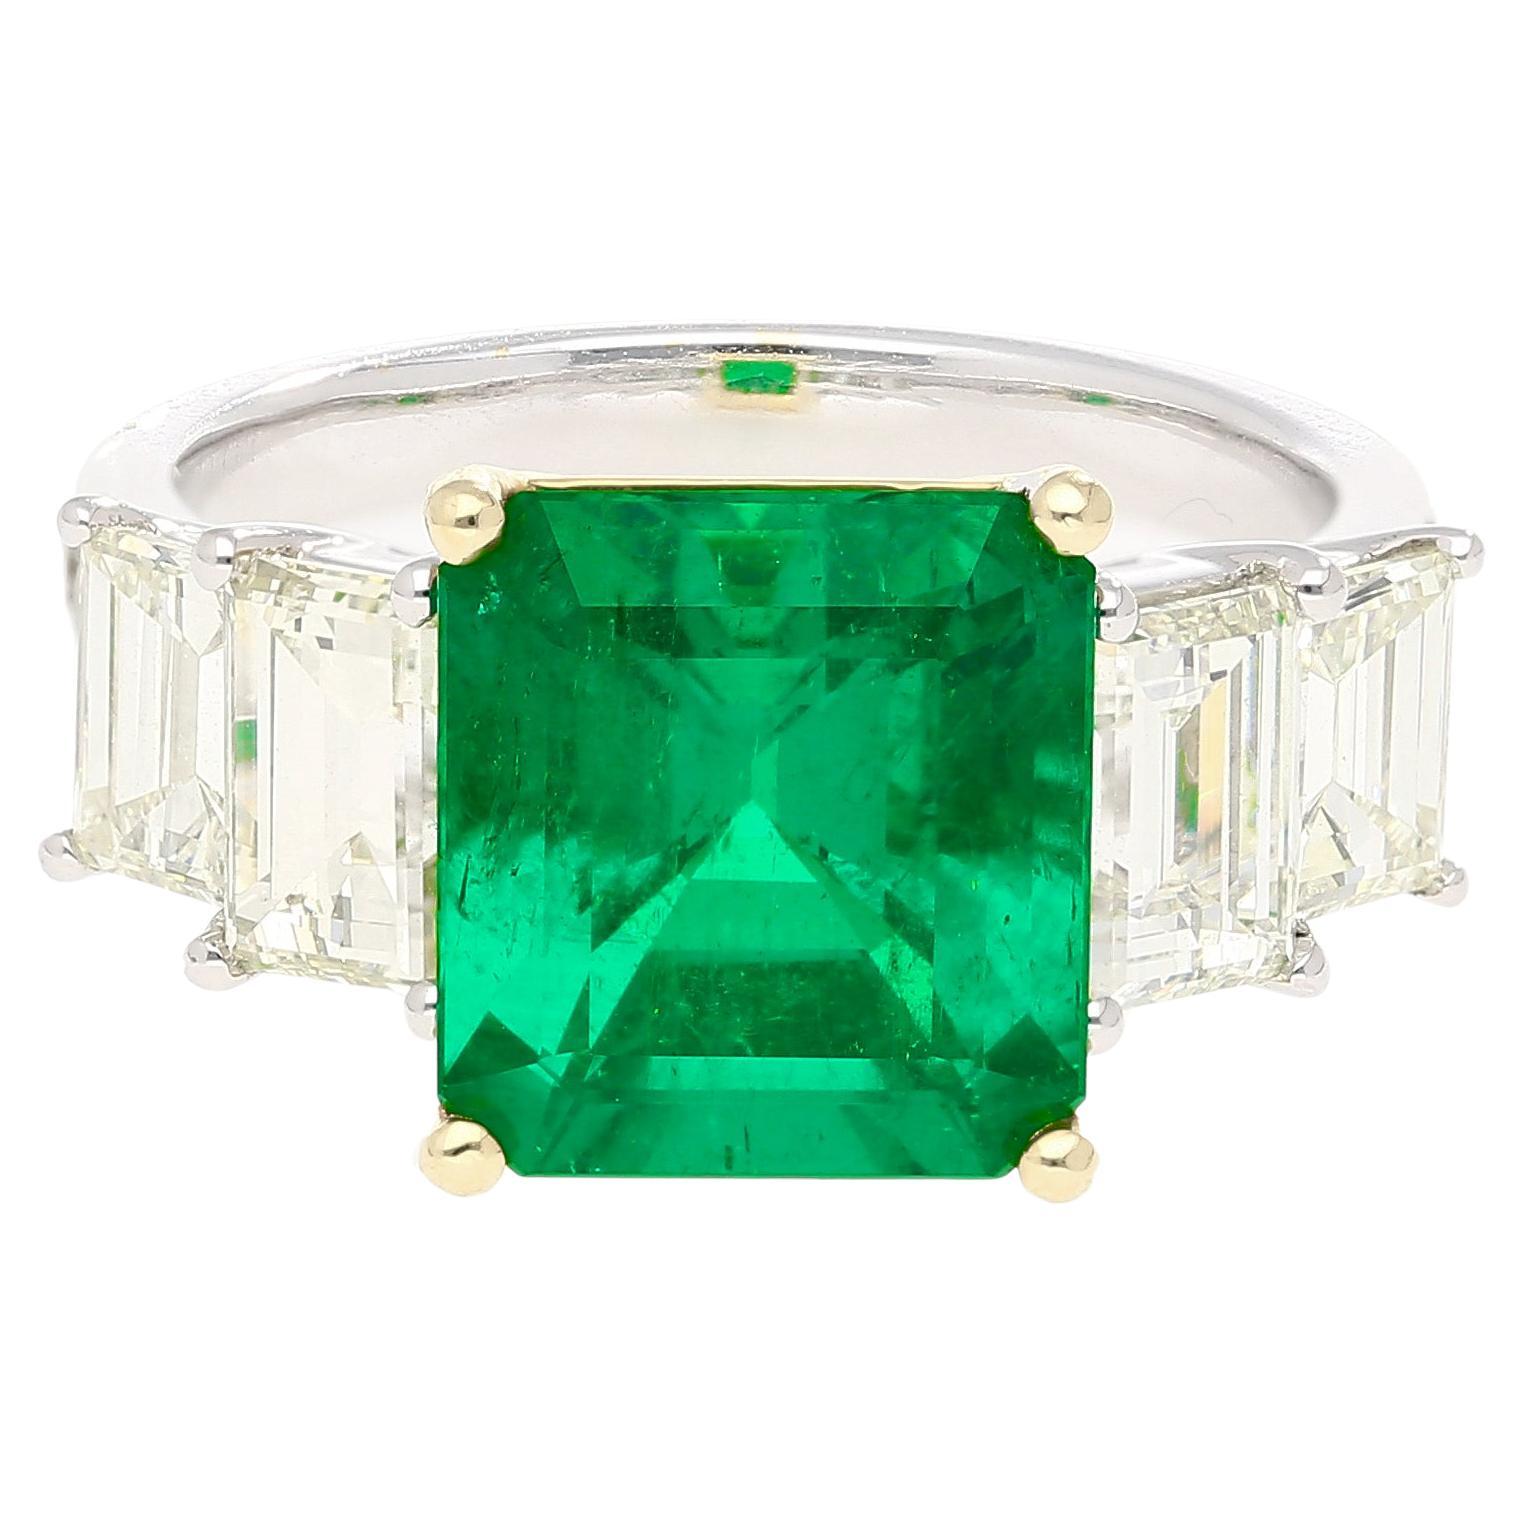 4.26 carat vivid green emerald with 'insignificant' oil treatment. Complete with a GRS certificate and appendix explaining the stone's significance and rarity. 

This Emerald was sourced from the legendary Muzo Mine, located in the western Boyaca